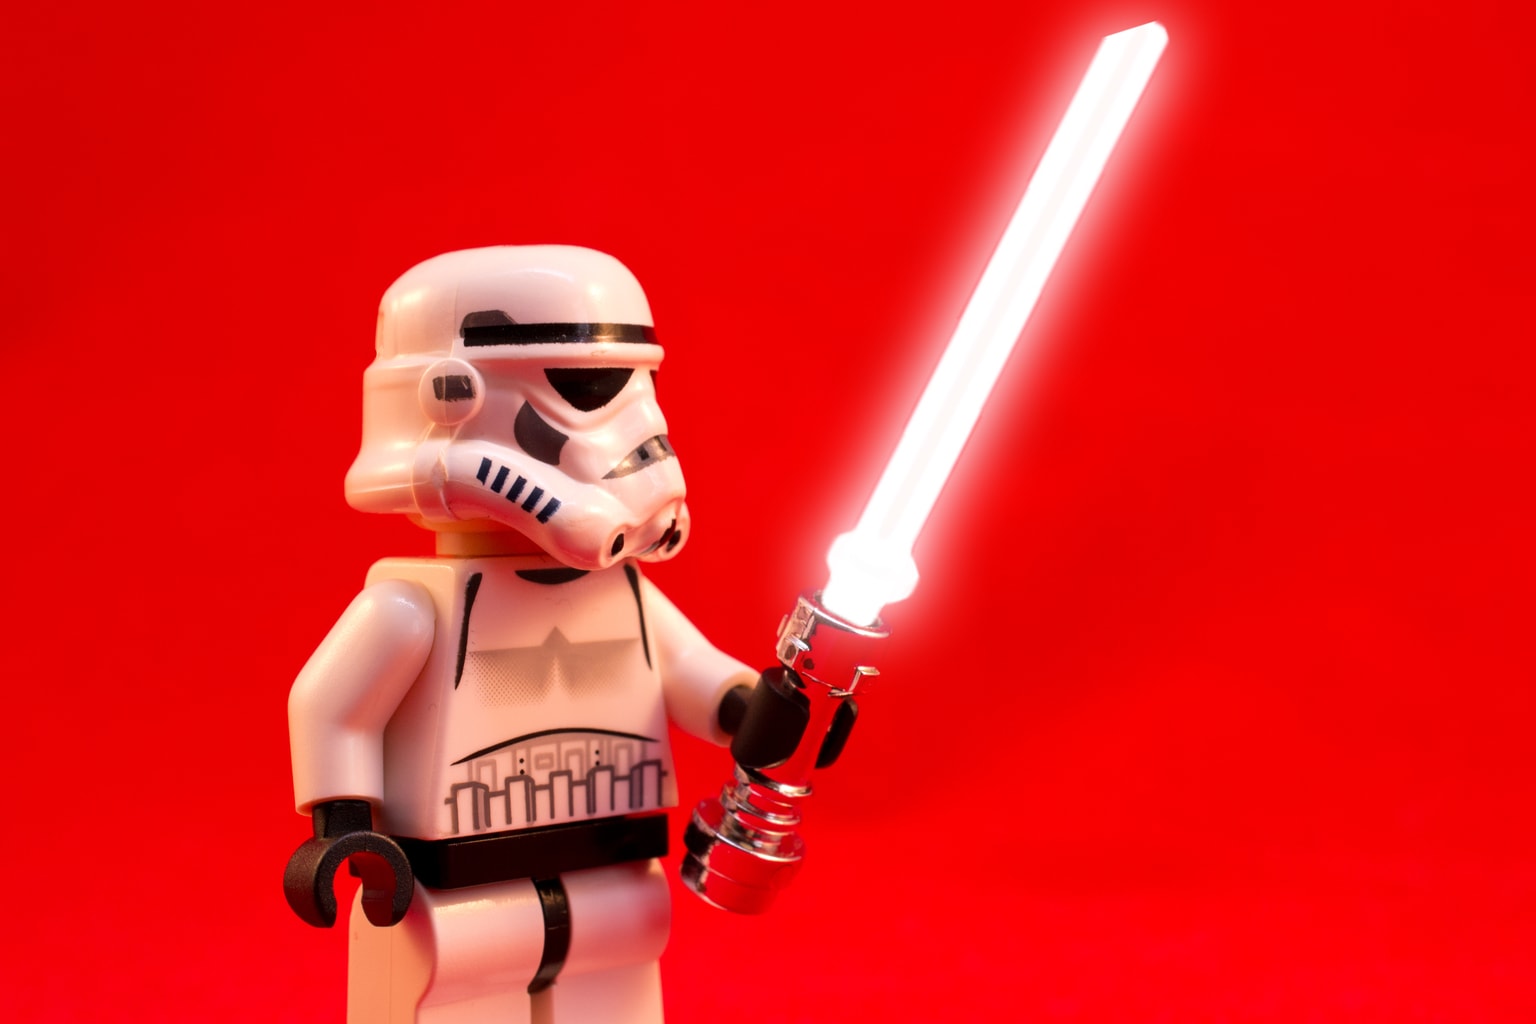 Lego with a lightsaber